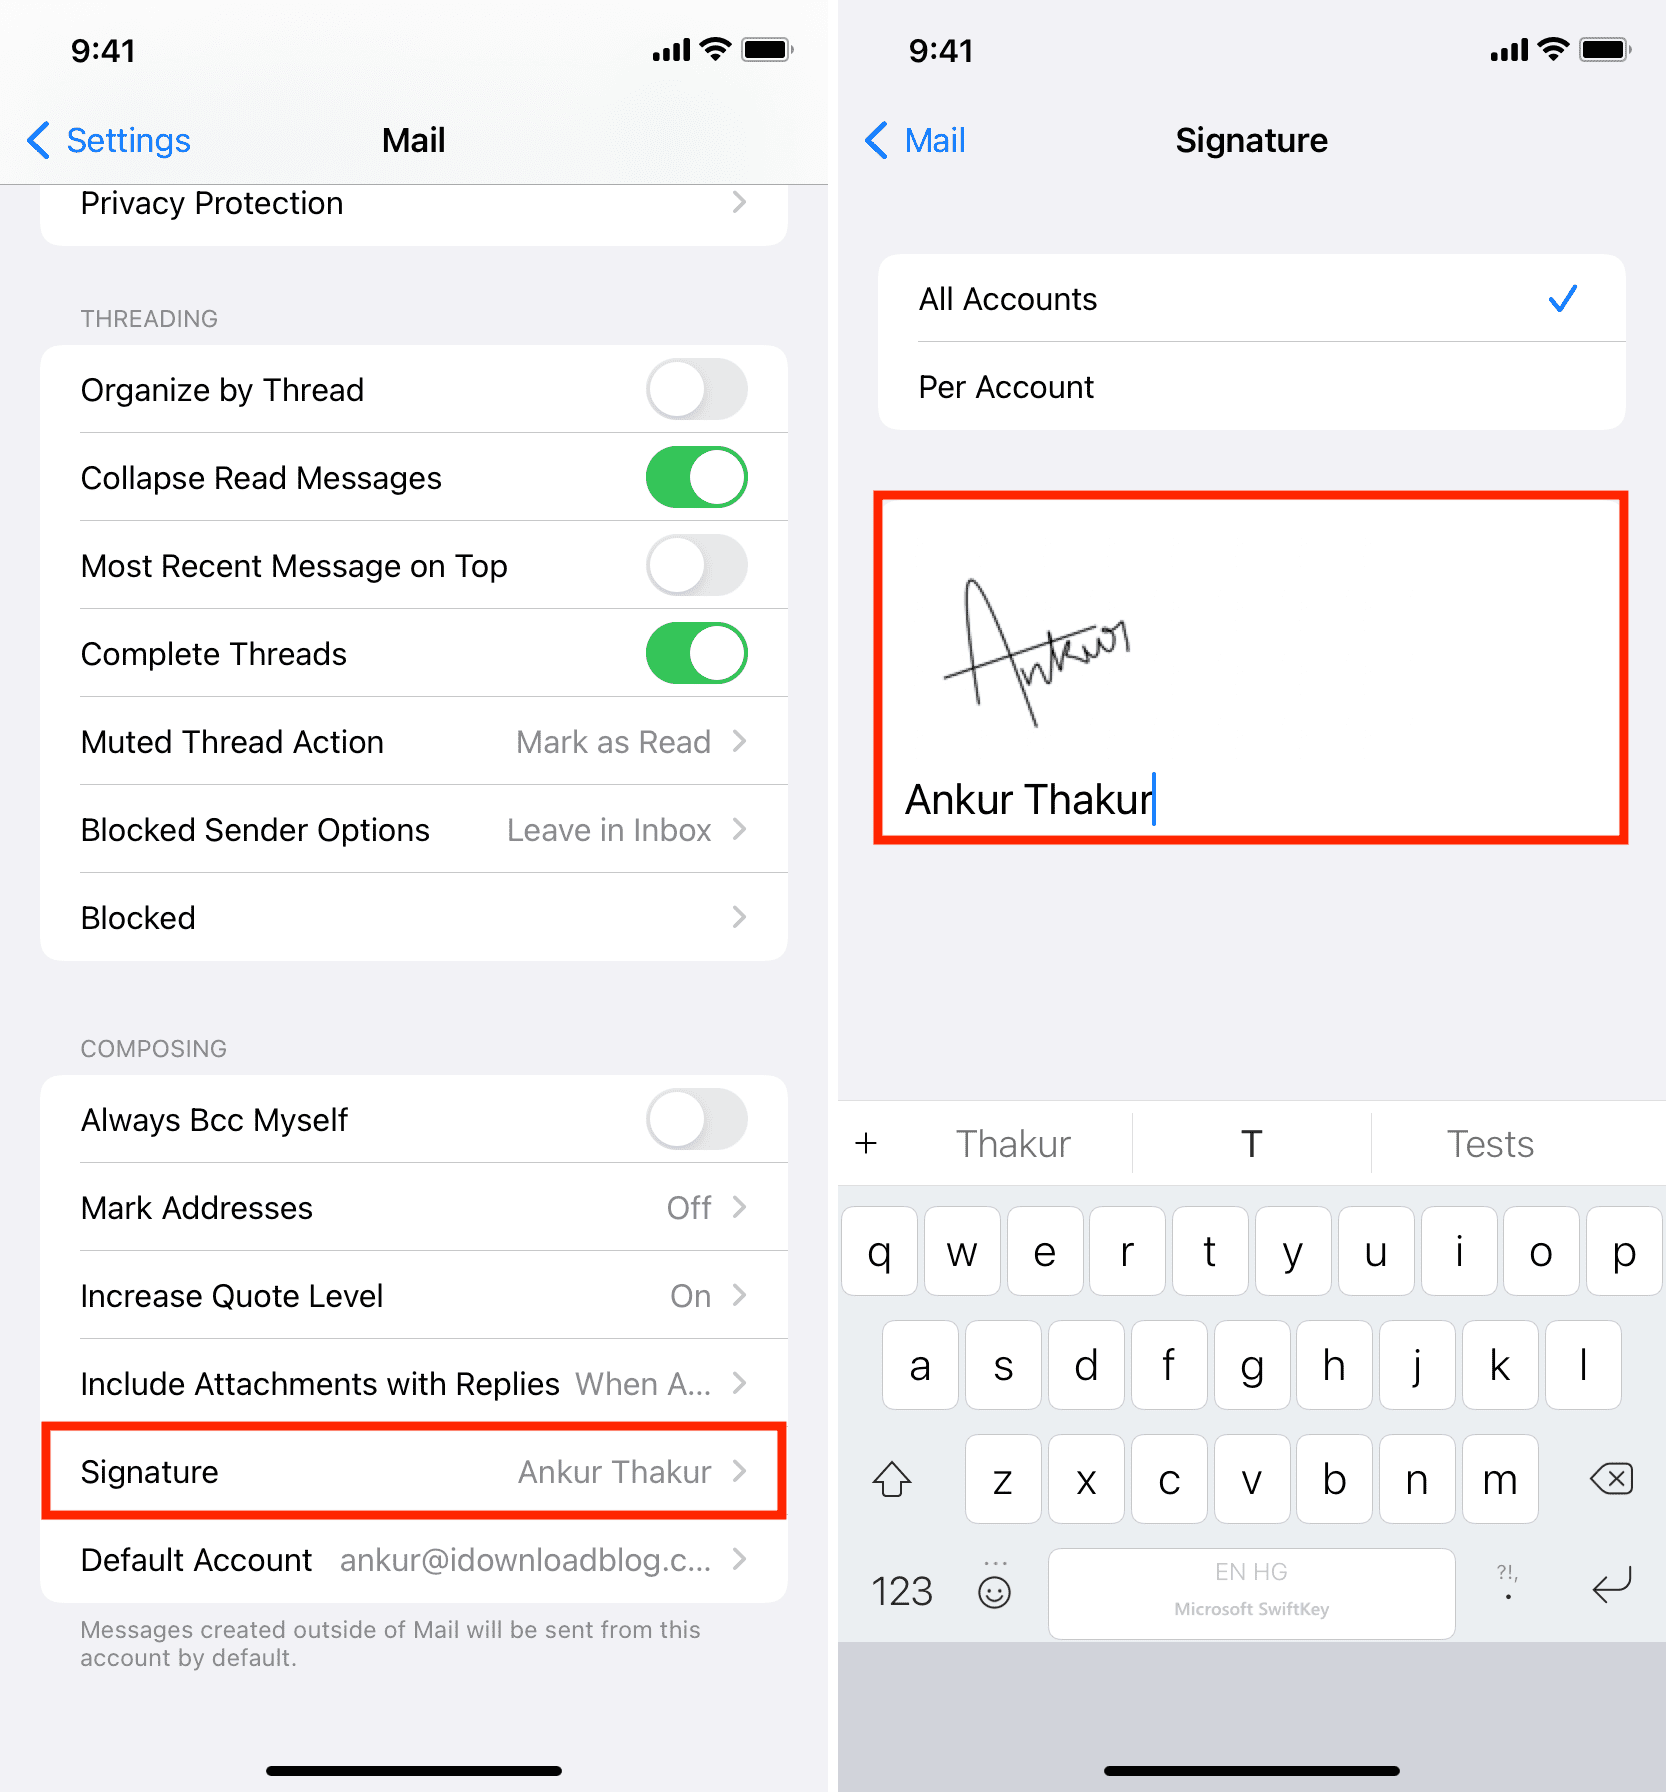 Paste handwritten image signature to Mail app settings on iPhone